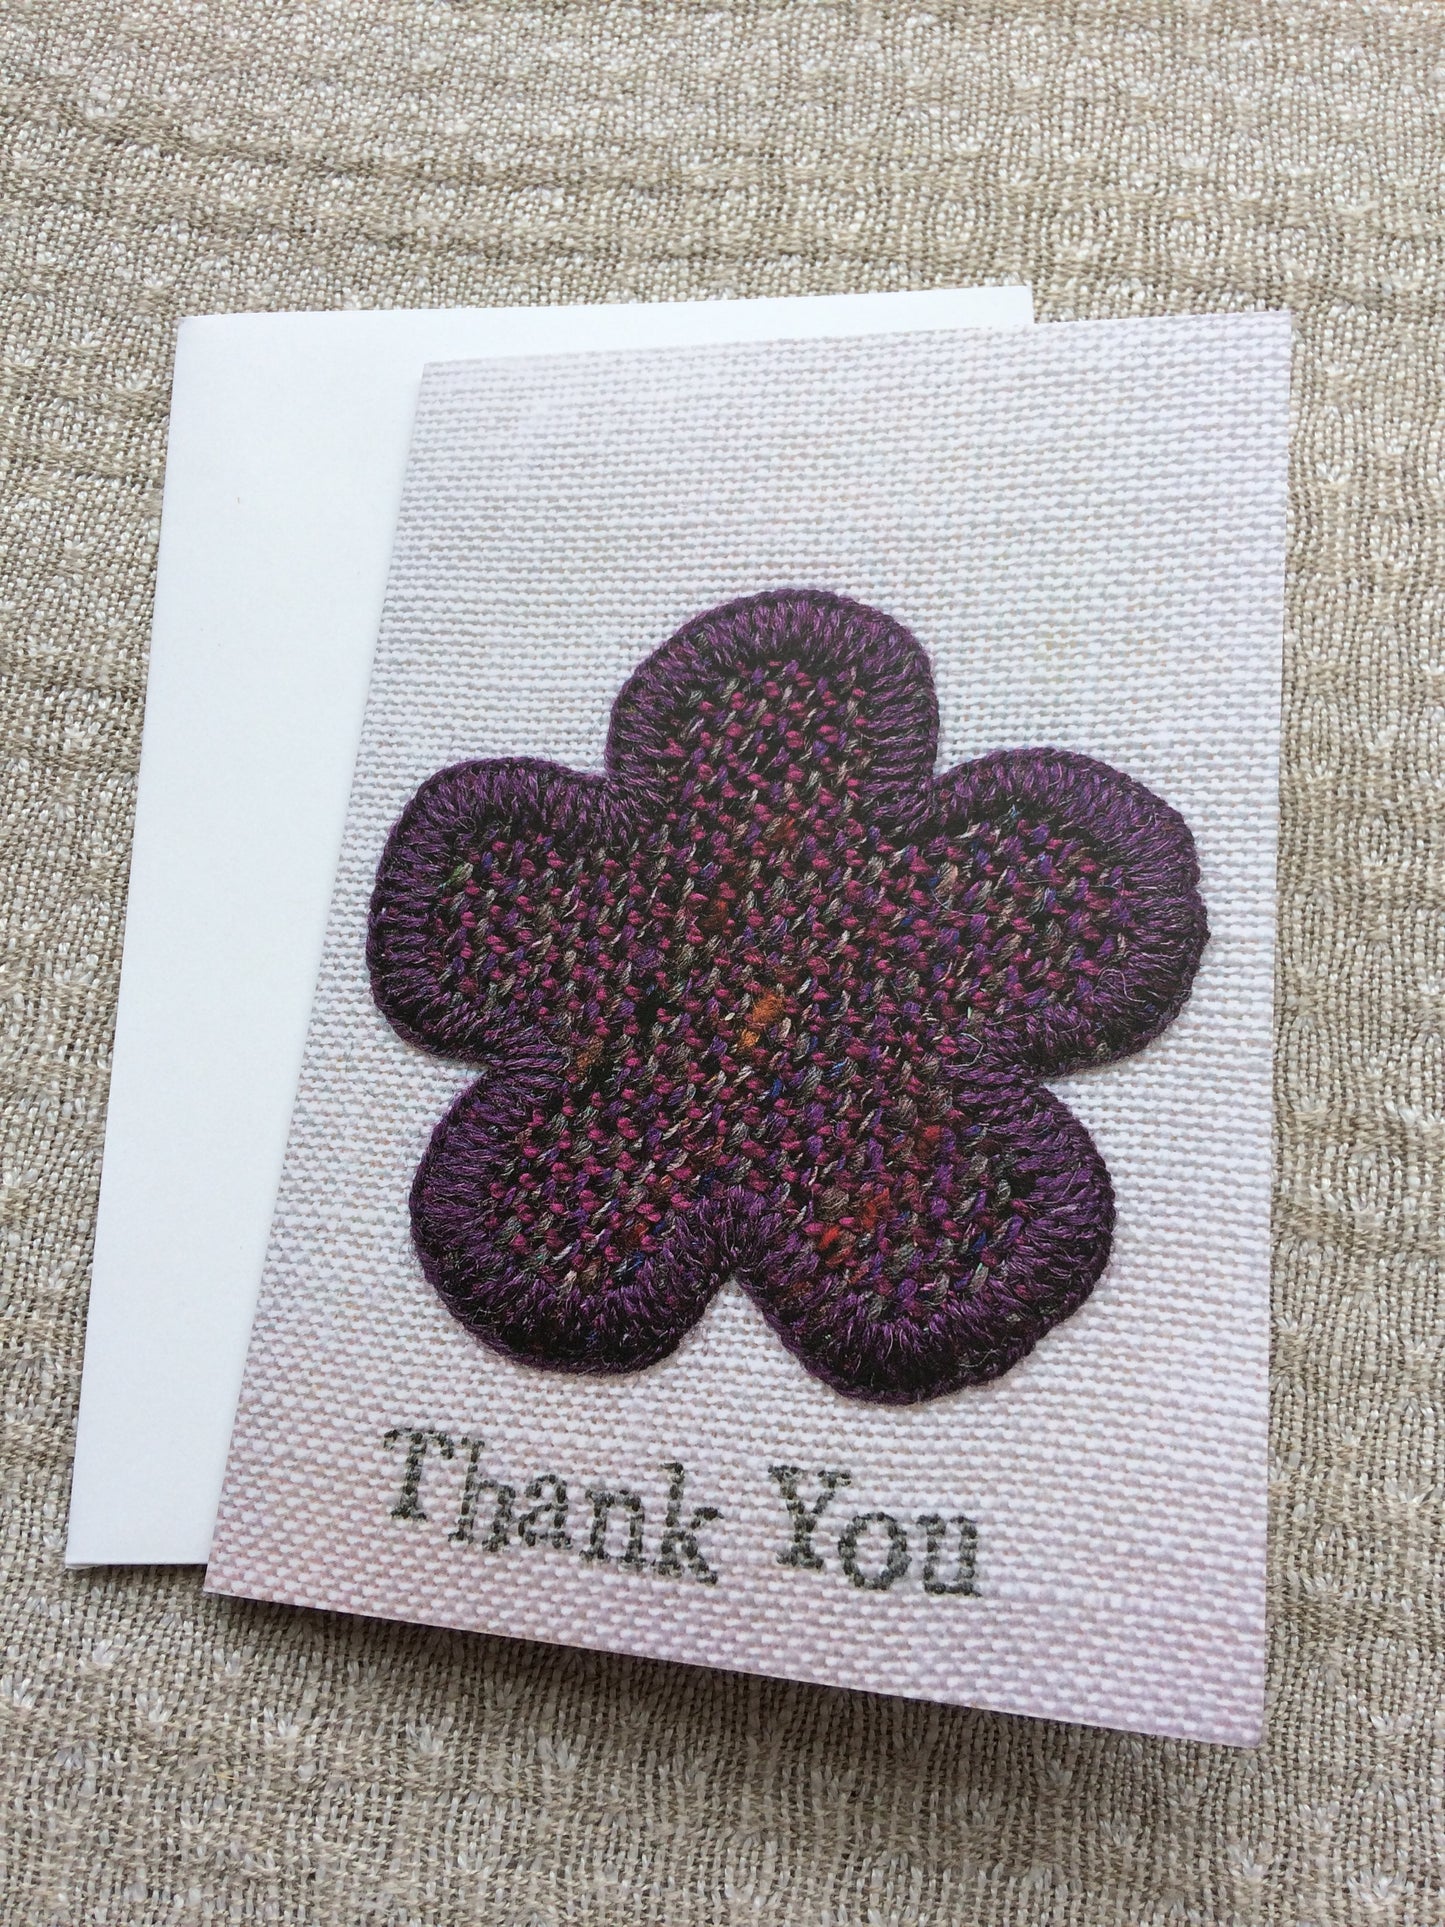 'Thank You' Greetings Cards